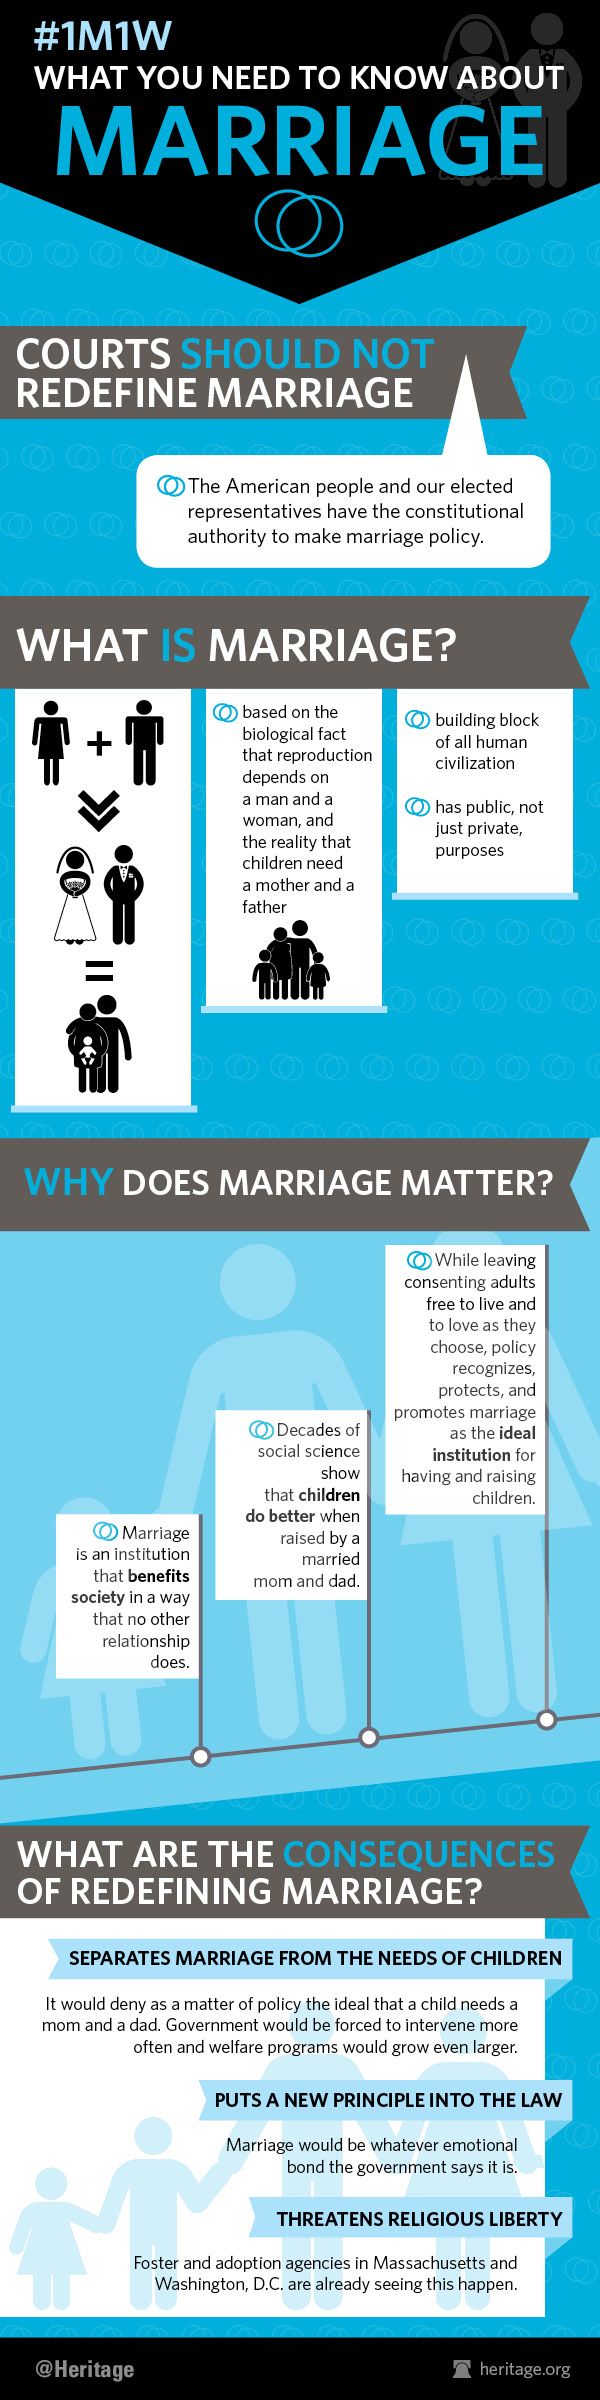 Marriage_Infographic_v5